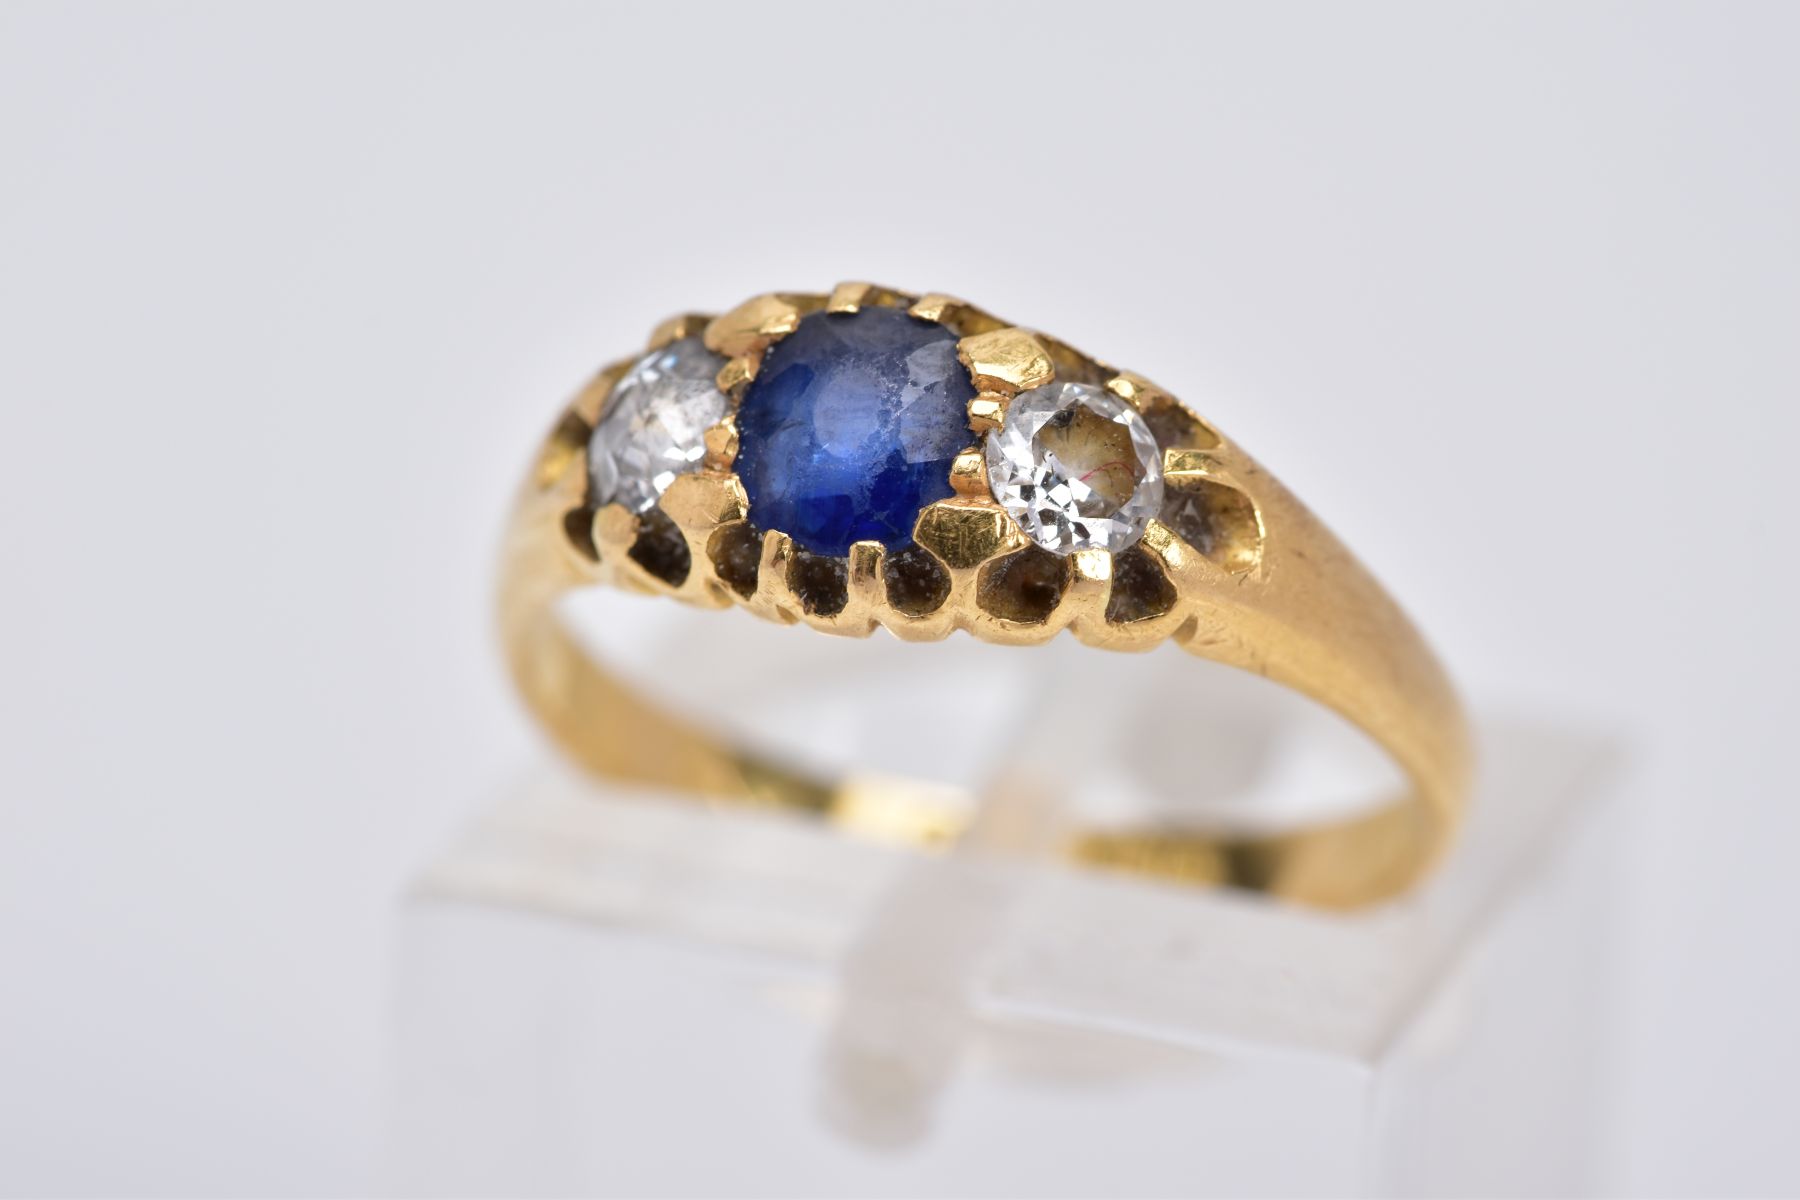 AN 18CT GOLD EARLY 20TH CENTURY SAPPHIRE AND DIAMOND RING, designed with a central oval cut blue